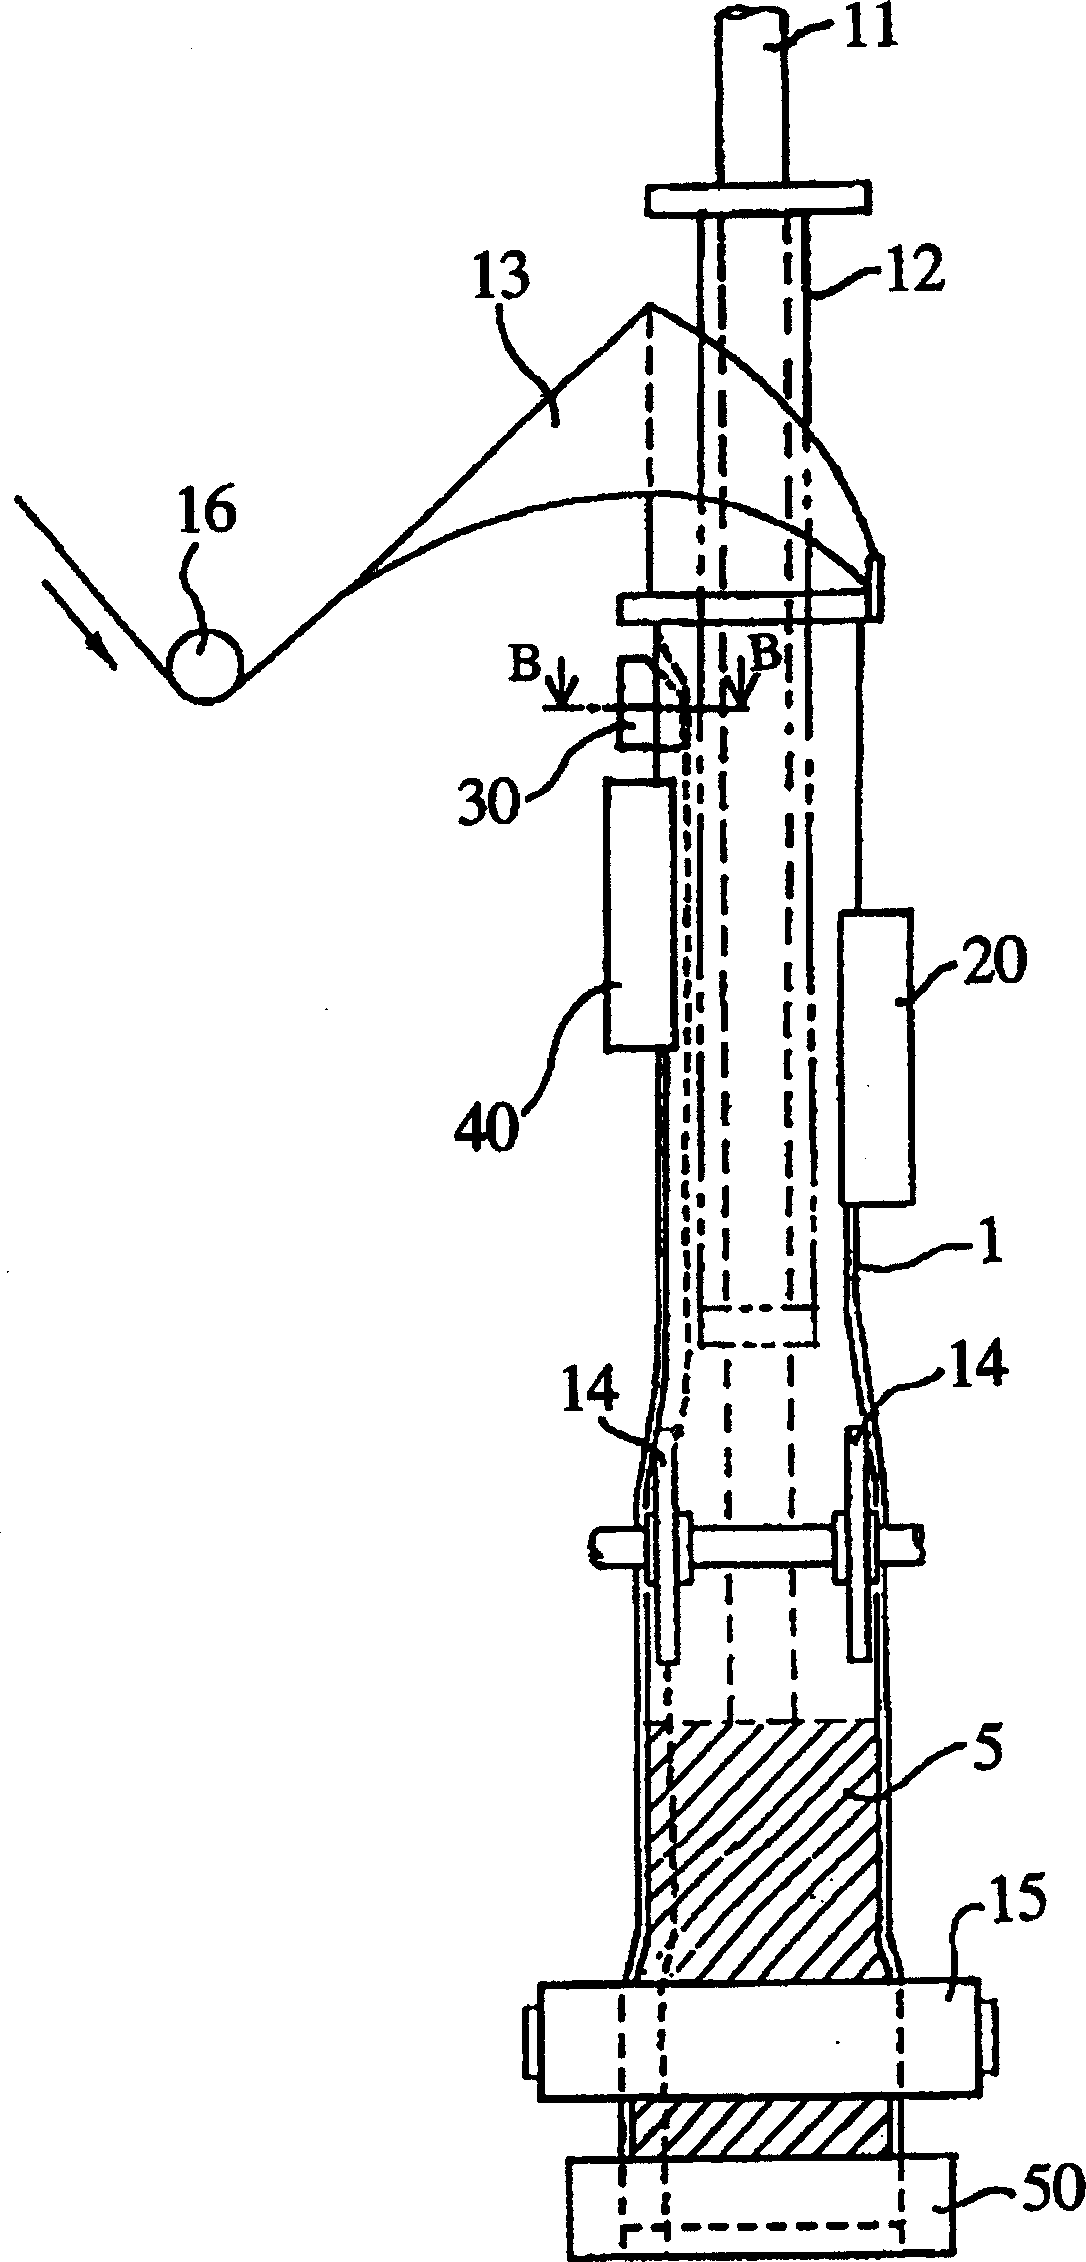 Apparatus for forming, filling and sealing self-supporting pocket